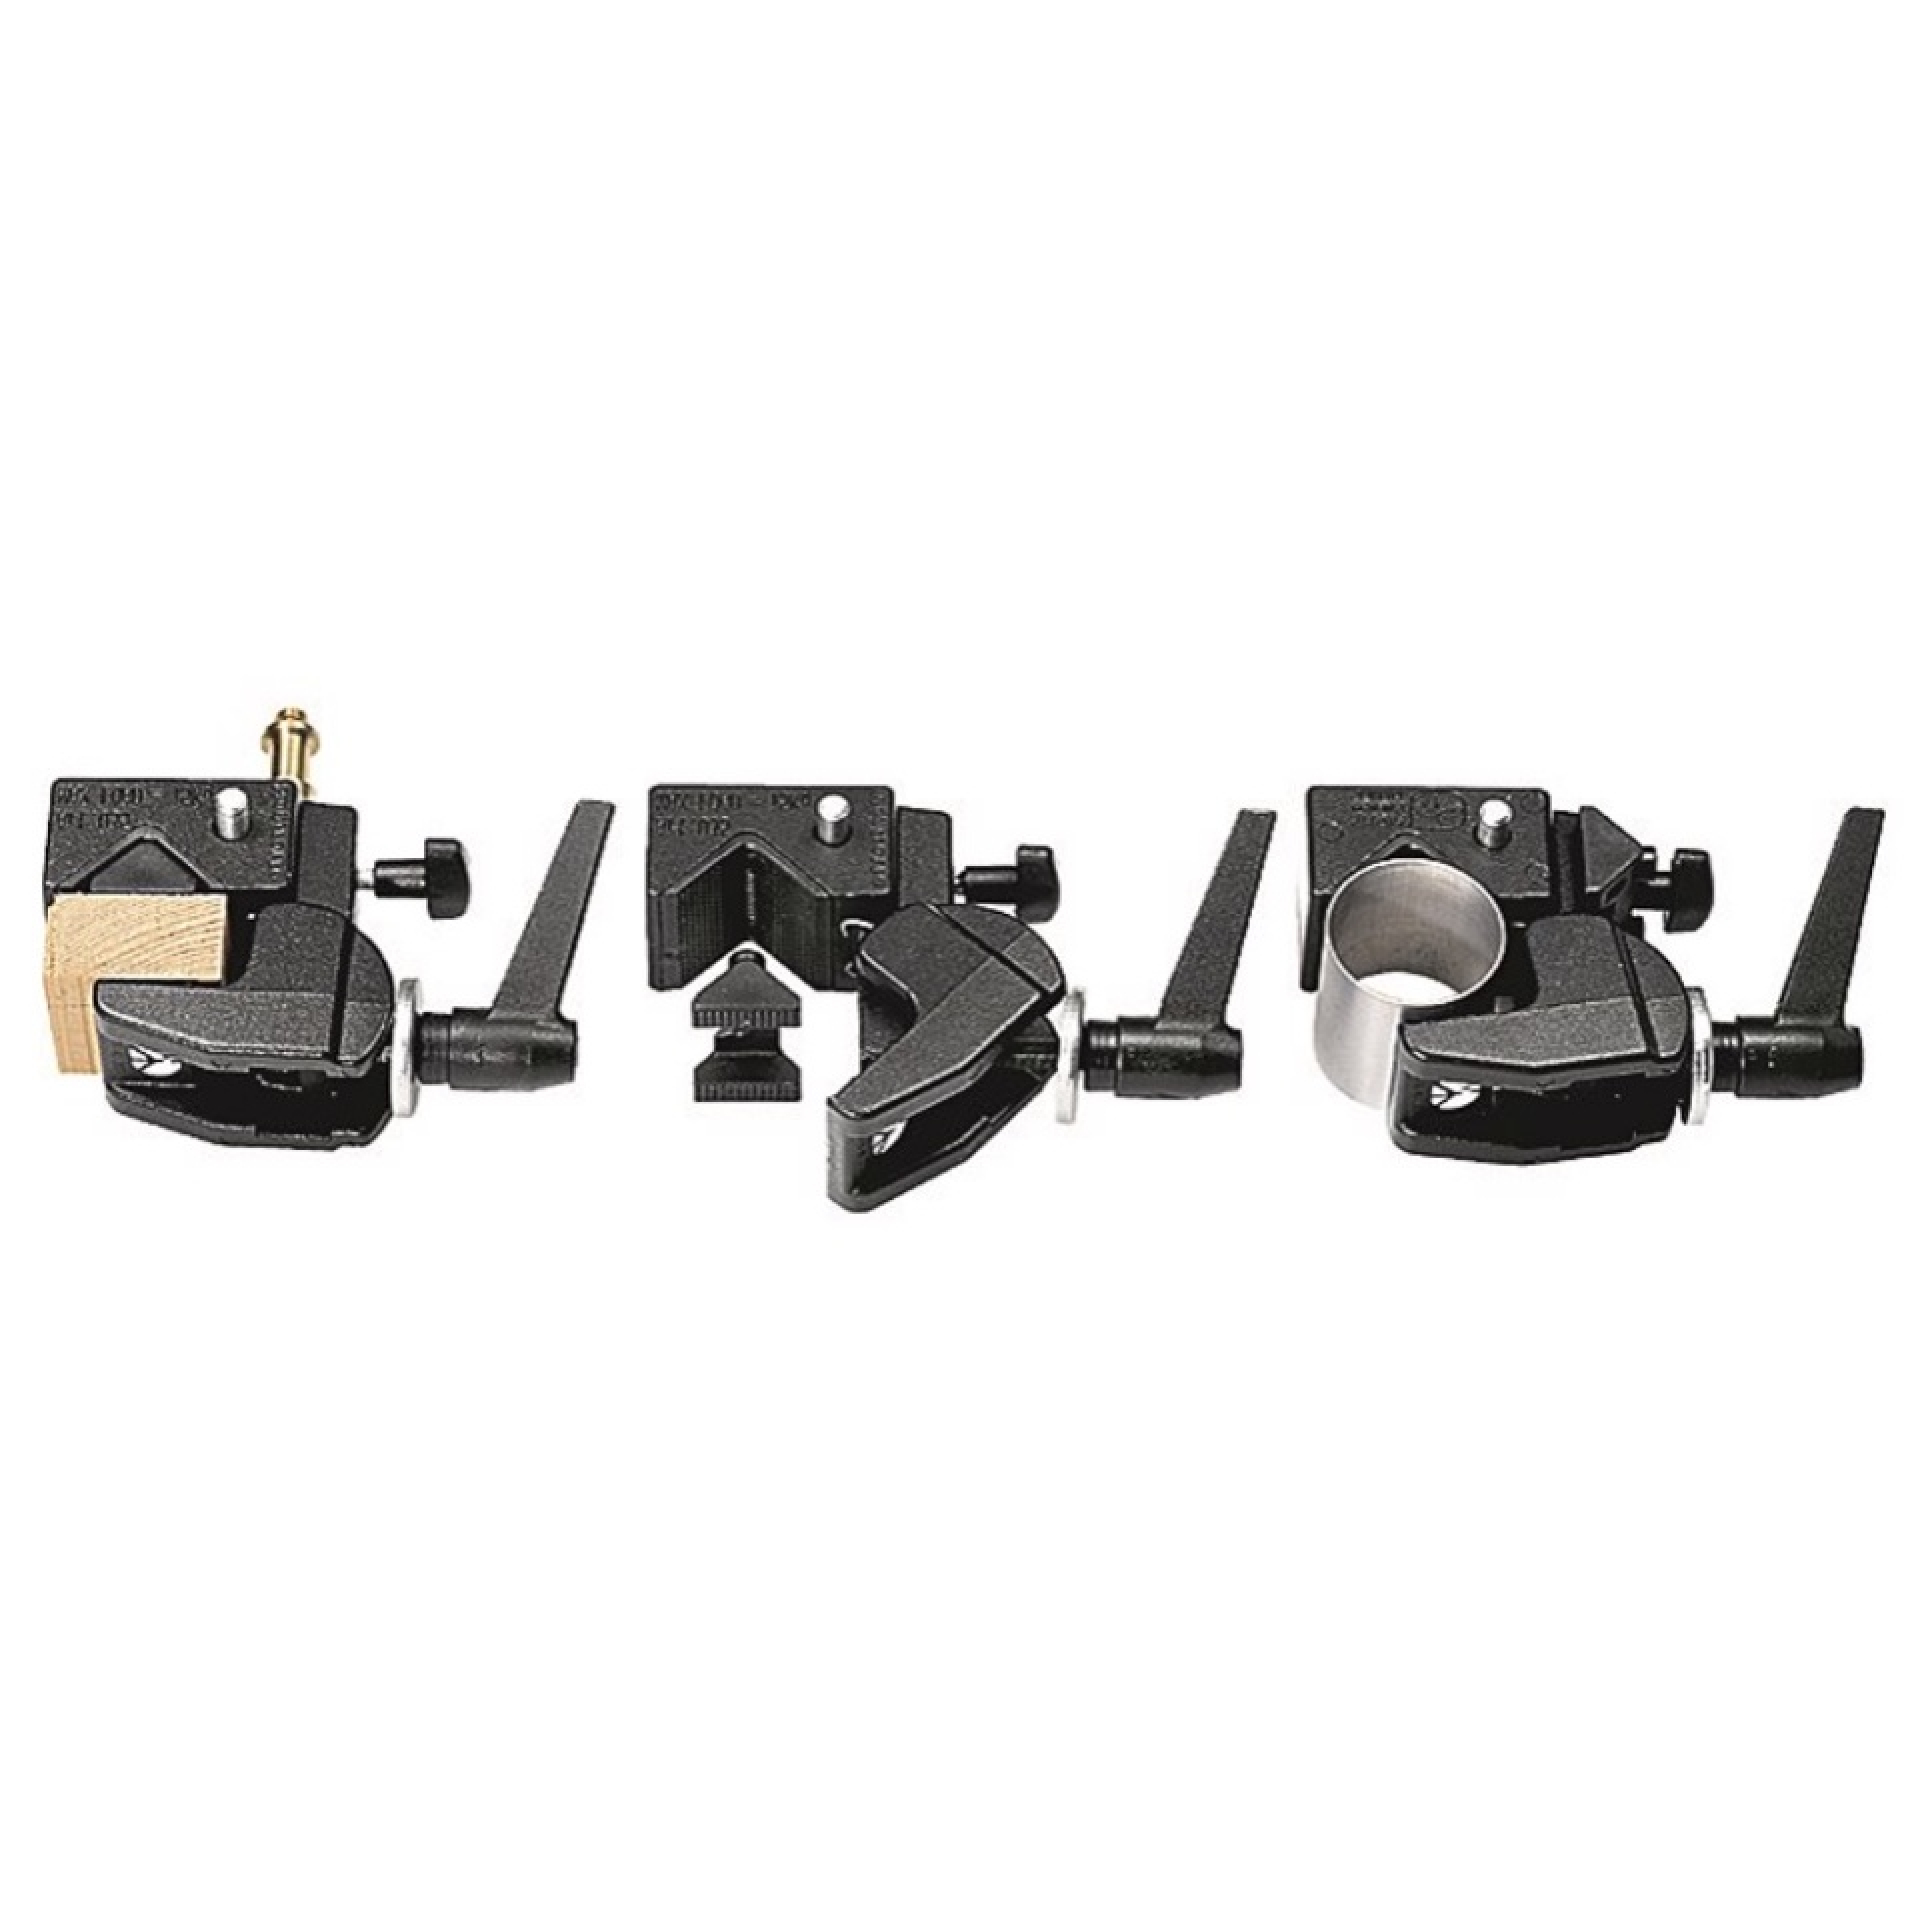 Manfrotto 035FTC Super Clamp - options